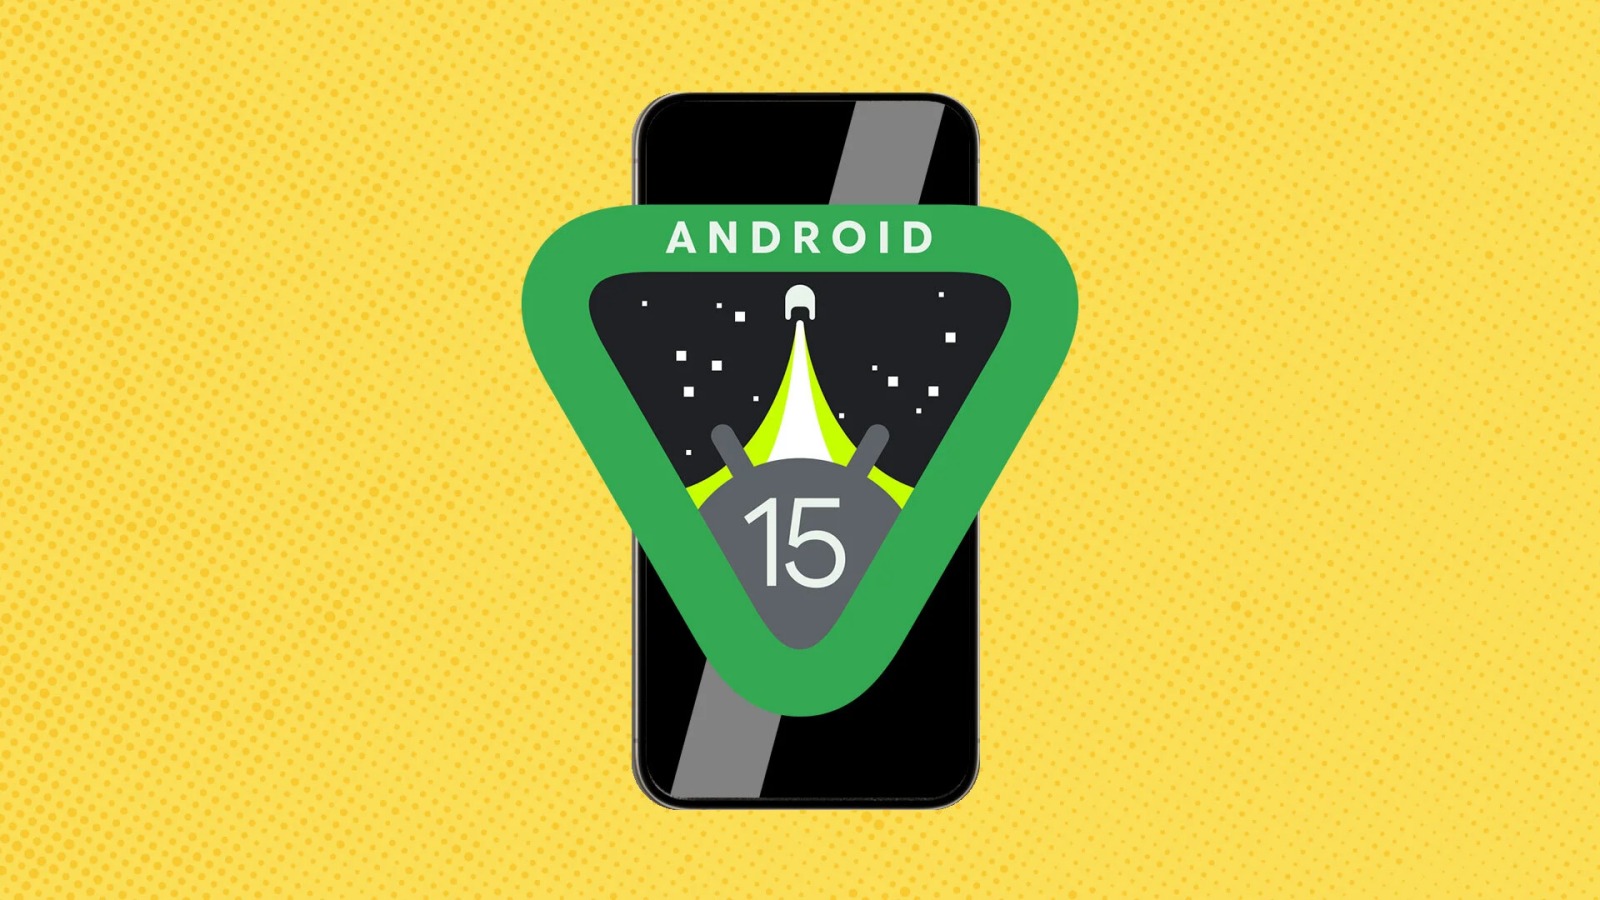 Google reveals the secret of the Android 15 space logo